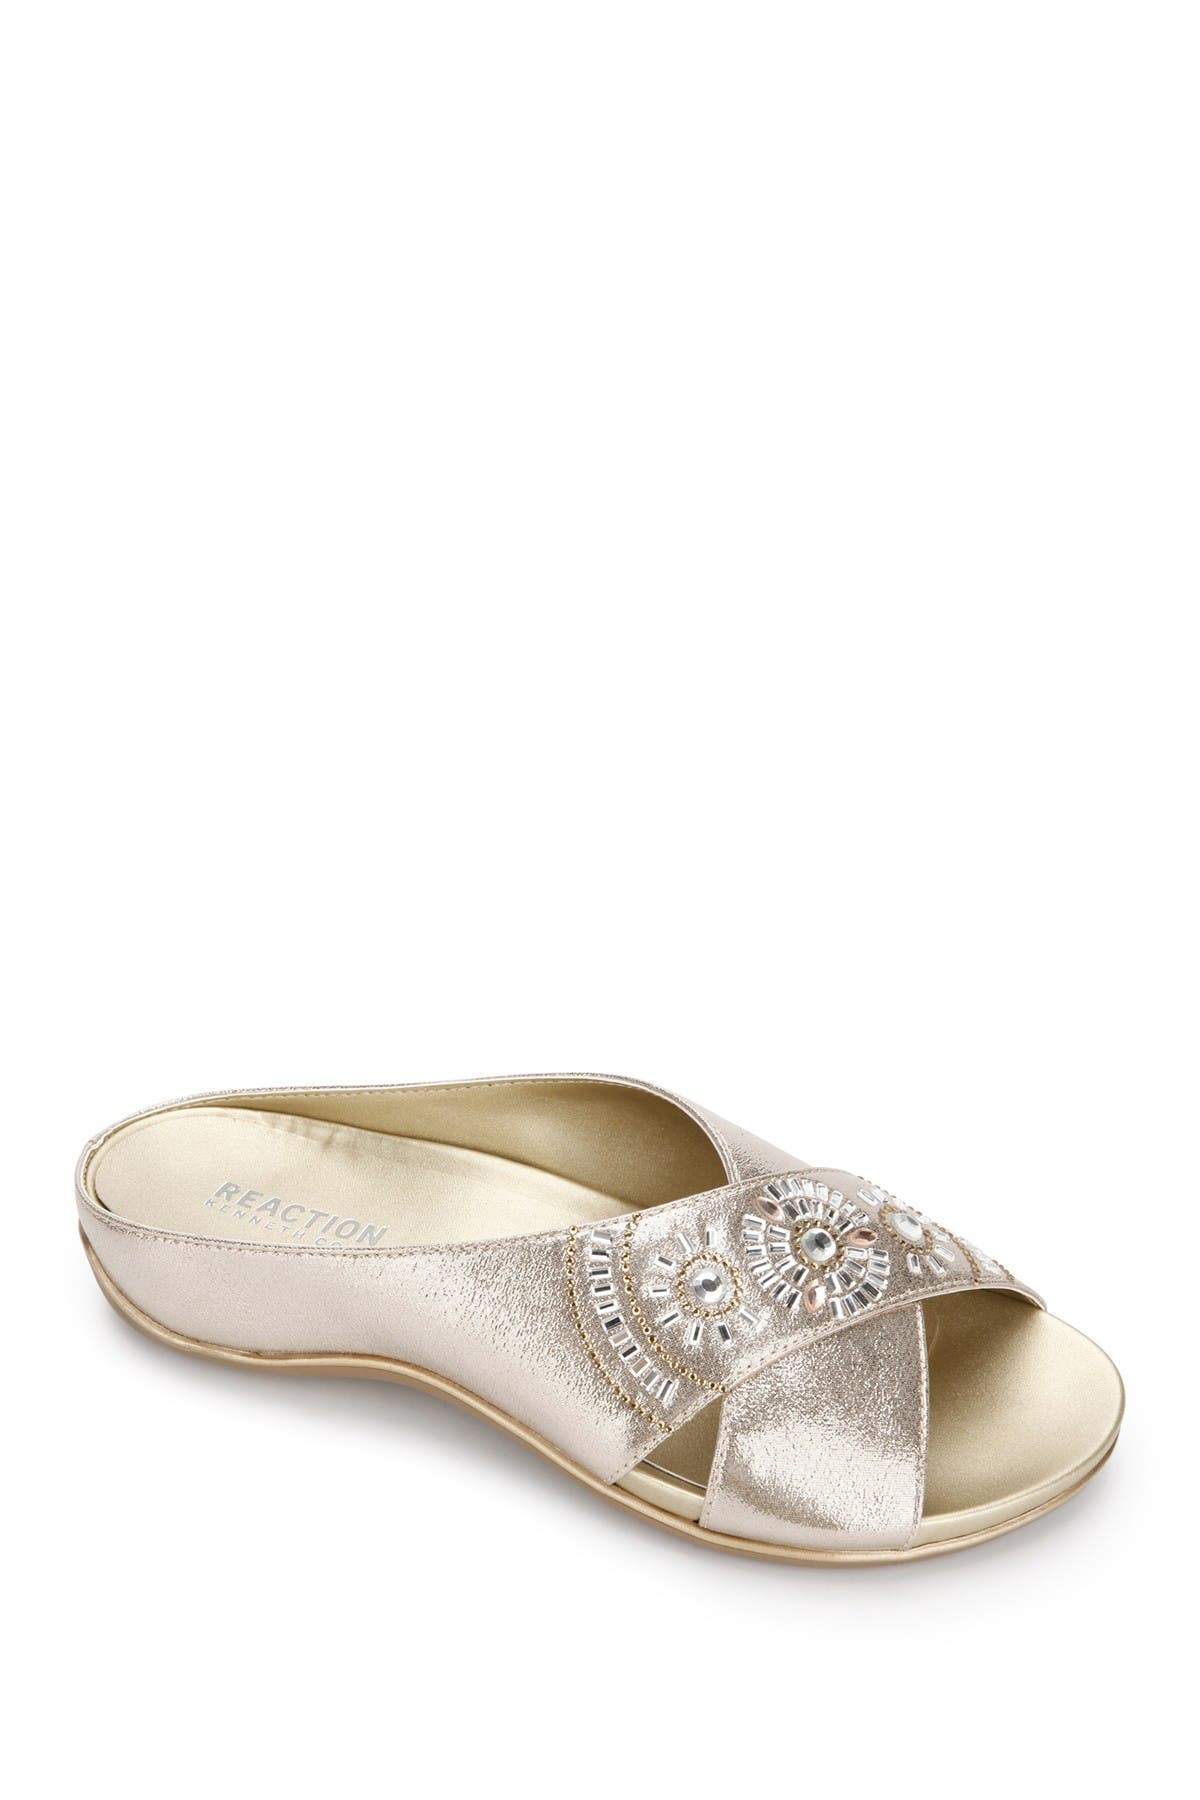 Kenneth Cole Reaction Glam 2.0 Embellished Mule In Soft Gold